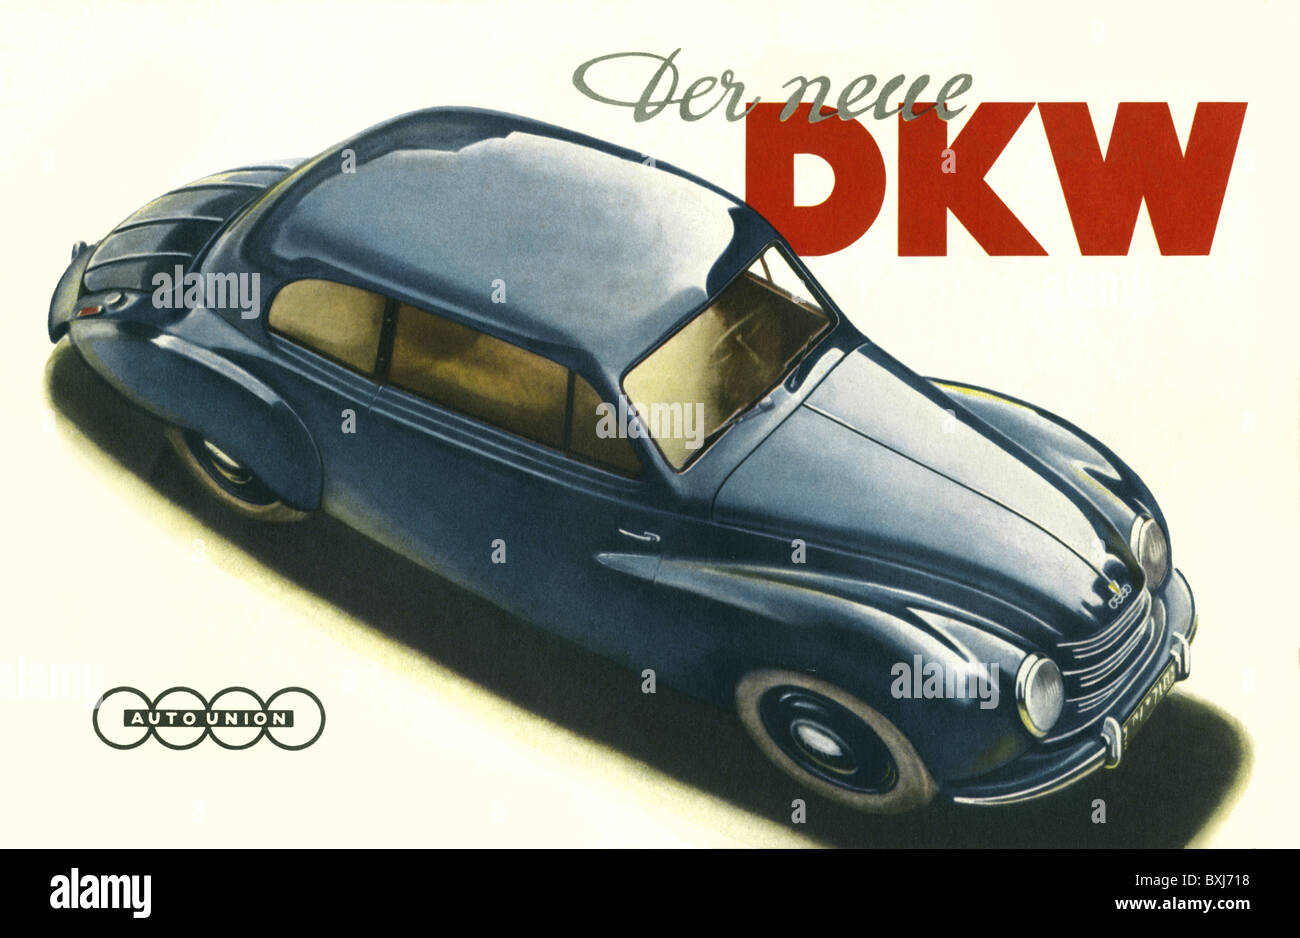 transport / transportation, car, vehicle variants, DKW, Meisterklasse F89, Germany, 1950, 1950s, 50s, 20th century, historic, historical, limousine, limo, saloon car, sedan, limousines, sedans, five-door sedan, car, cars, blue, two-stroke engine, two-stroke, mid-range car, economic miracle, economic miracles, prospectus, catalogue, Additional-Rights-Clearences-Not Available Stock Photo